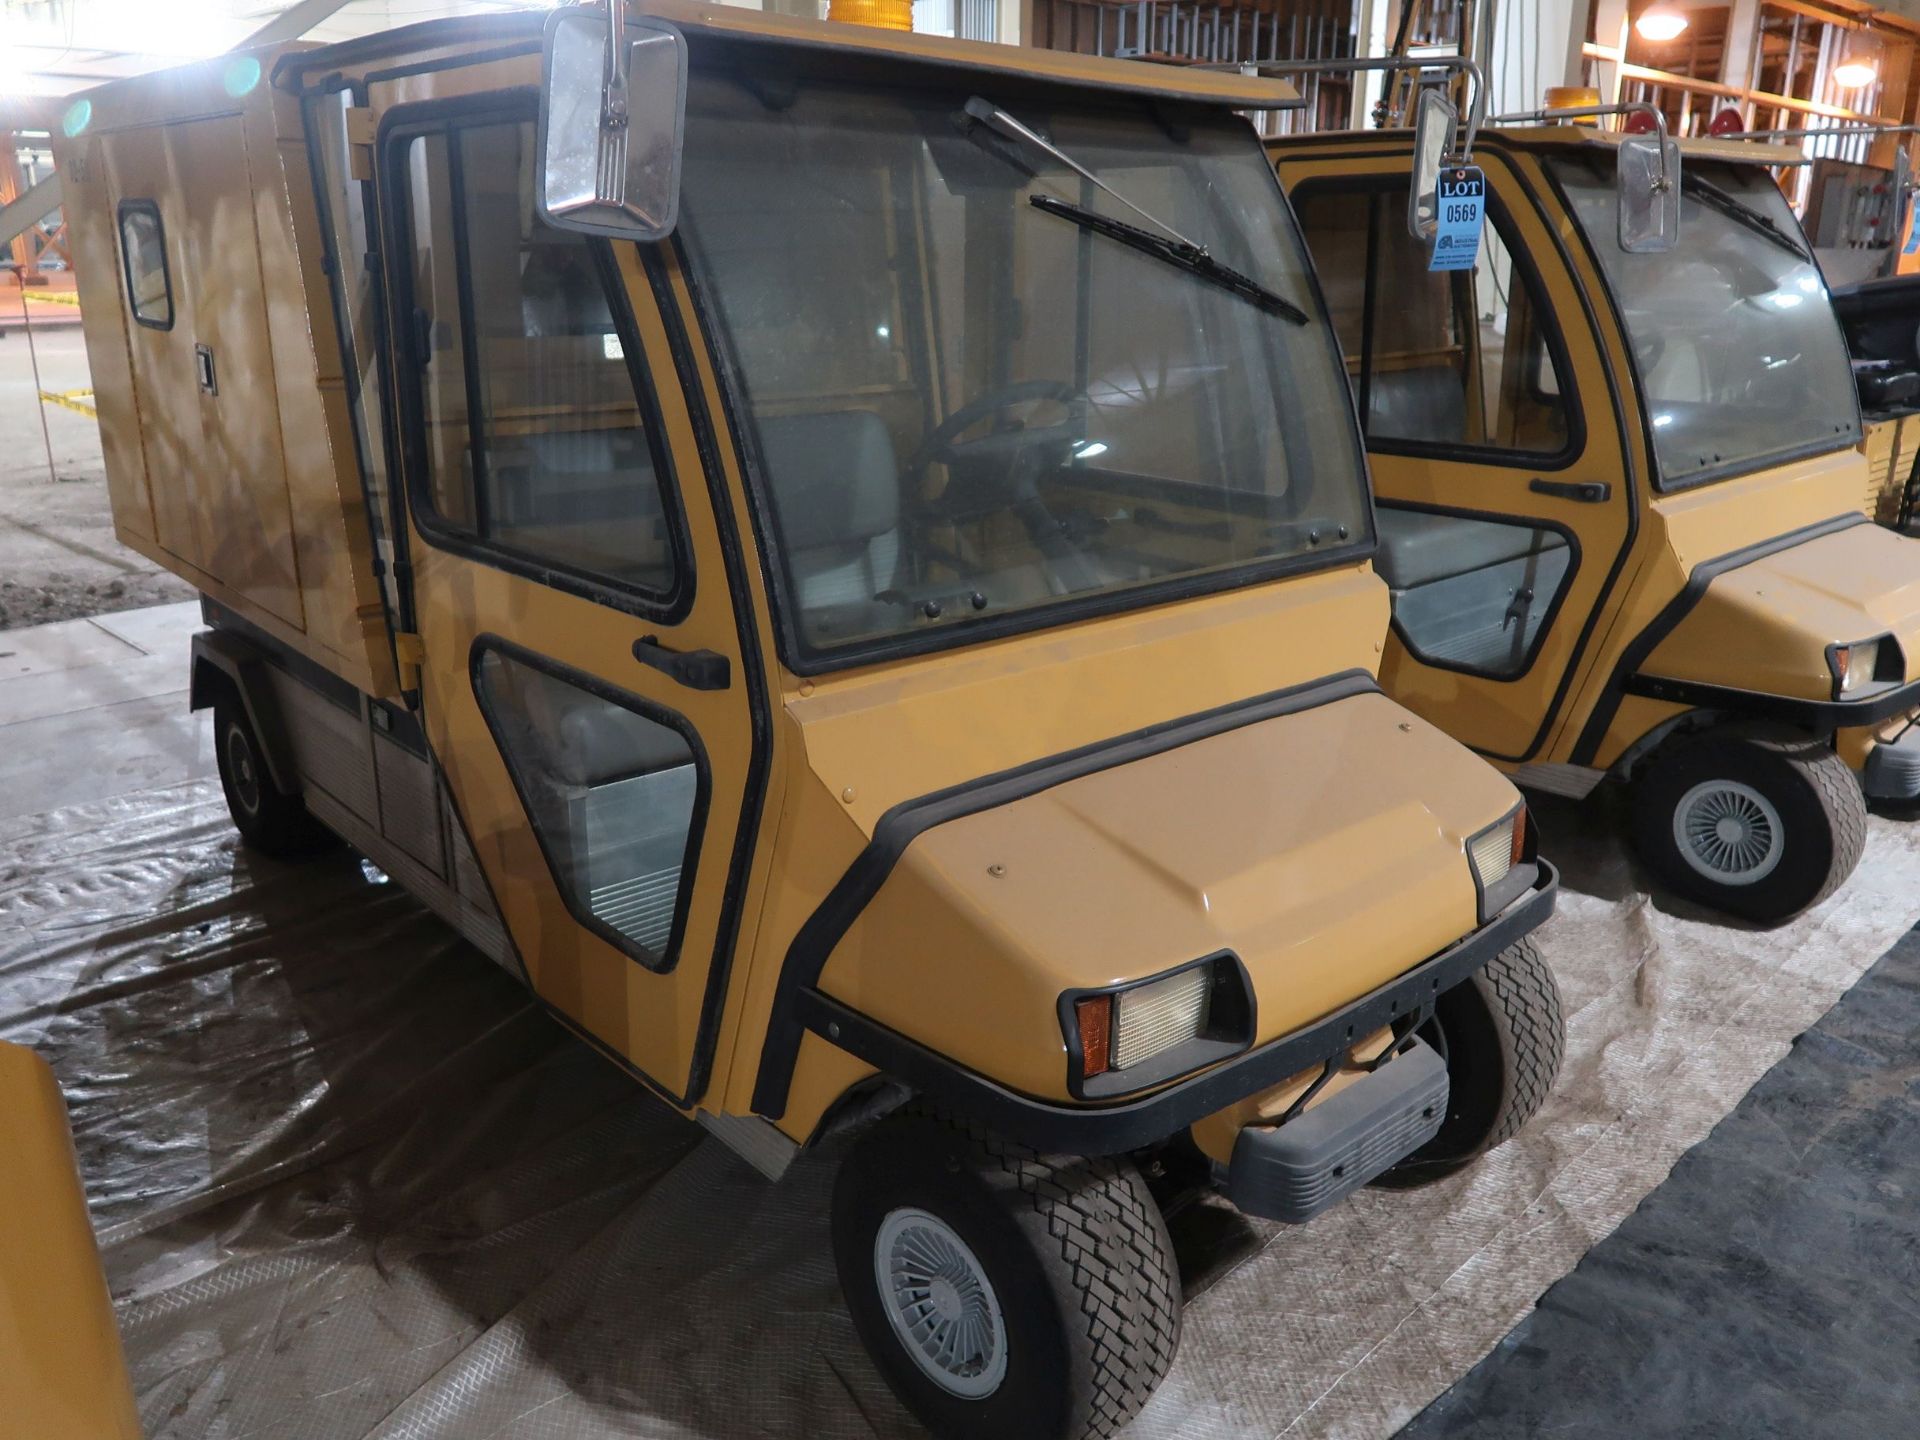 INGERSOLL RAND / CLUBCAR CARRYALL 6 ELECTRIC ENCLOSED REAR MAINTENANCE CART; S/N J0531-528158, 48" X - Image 3 of 7